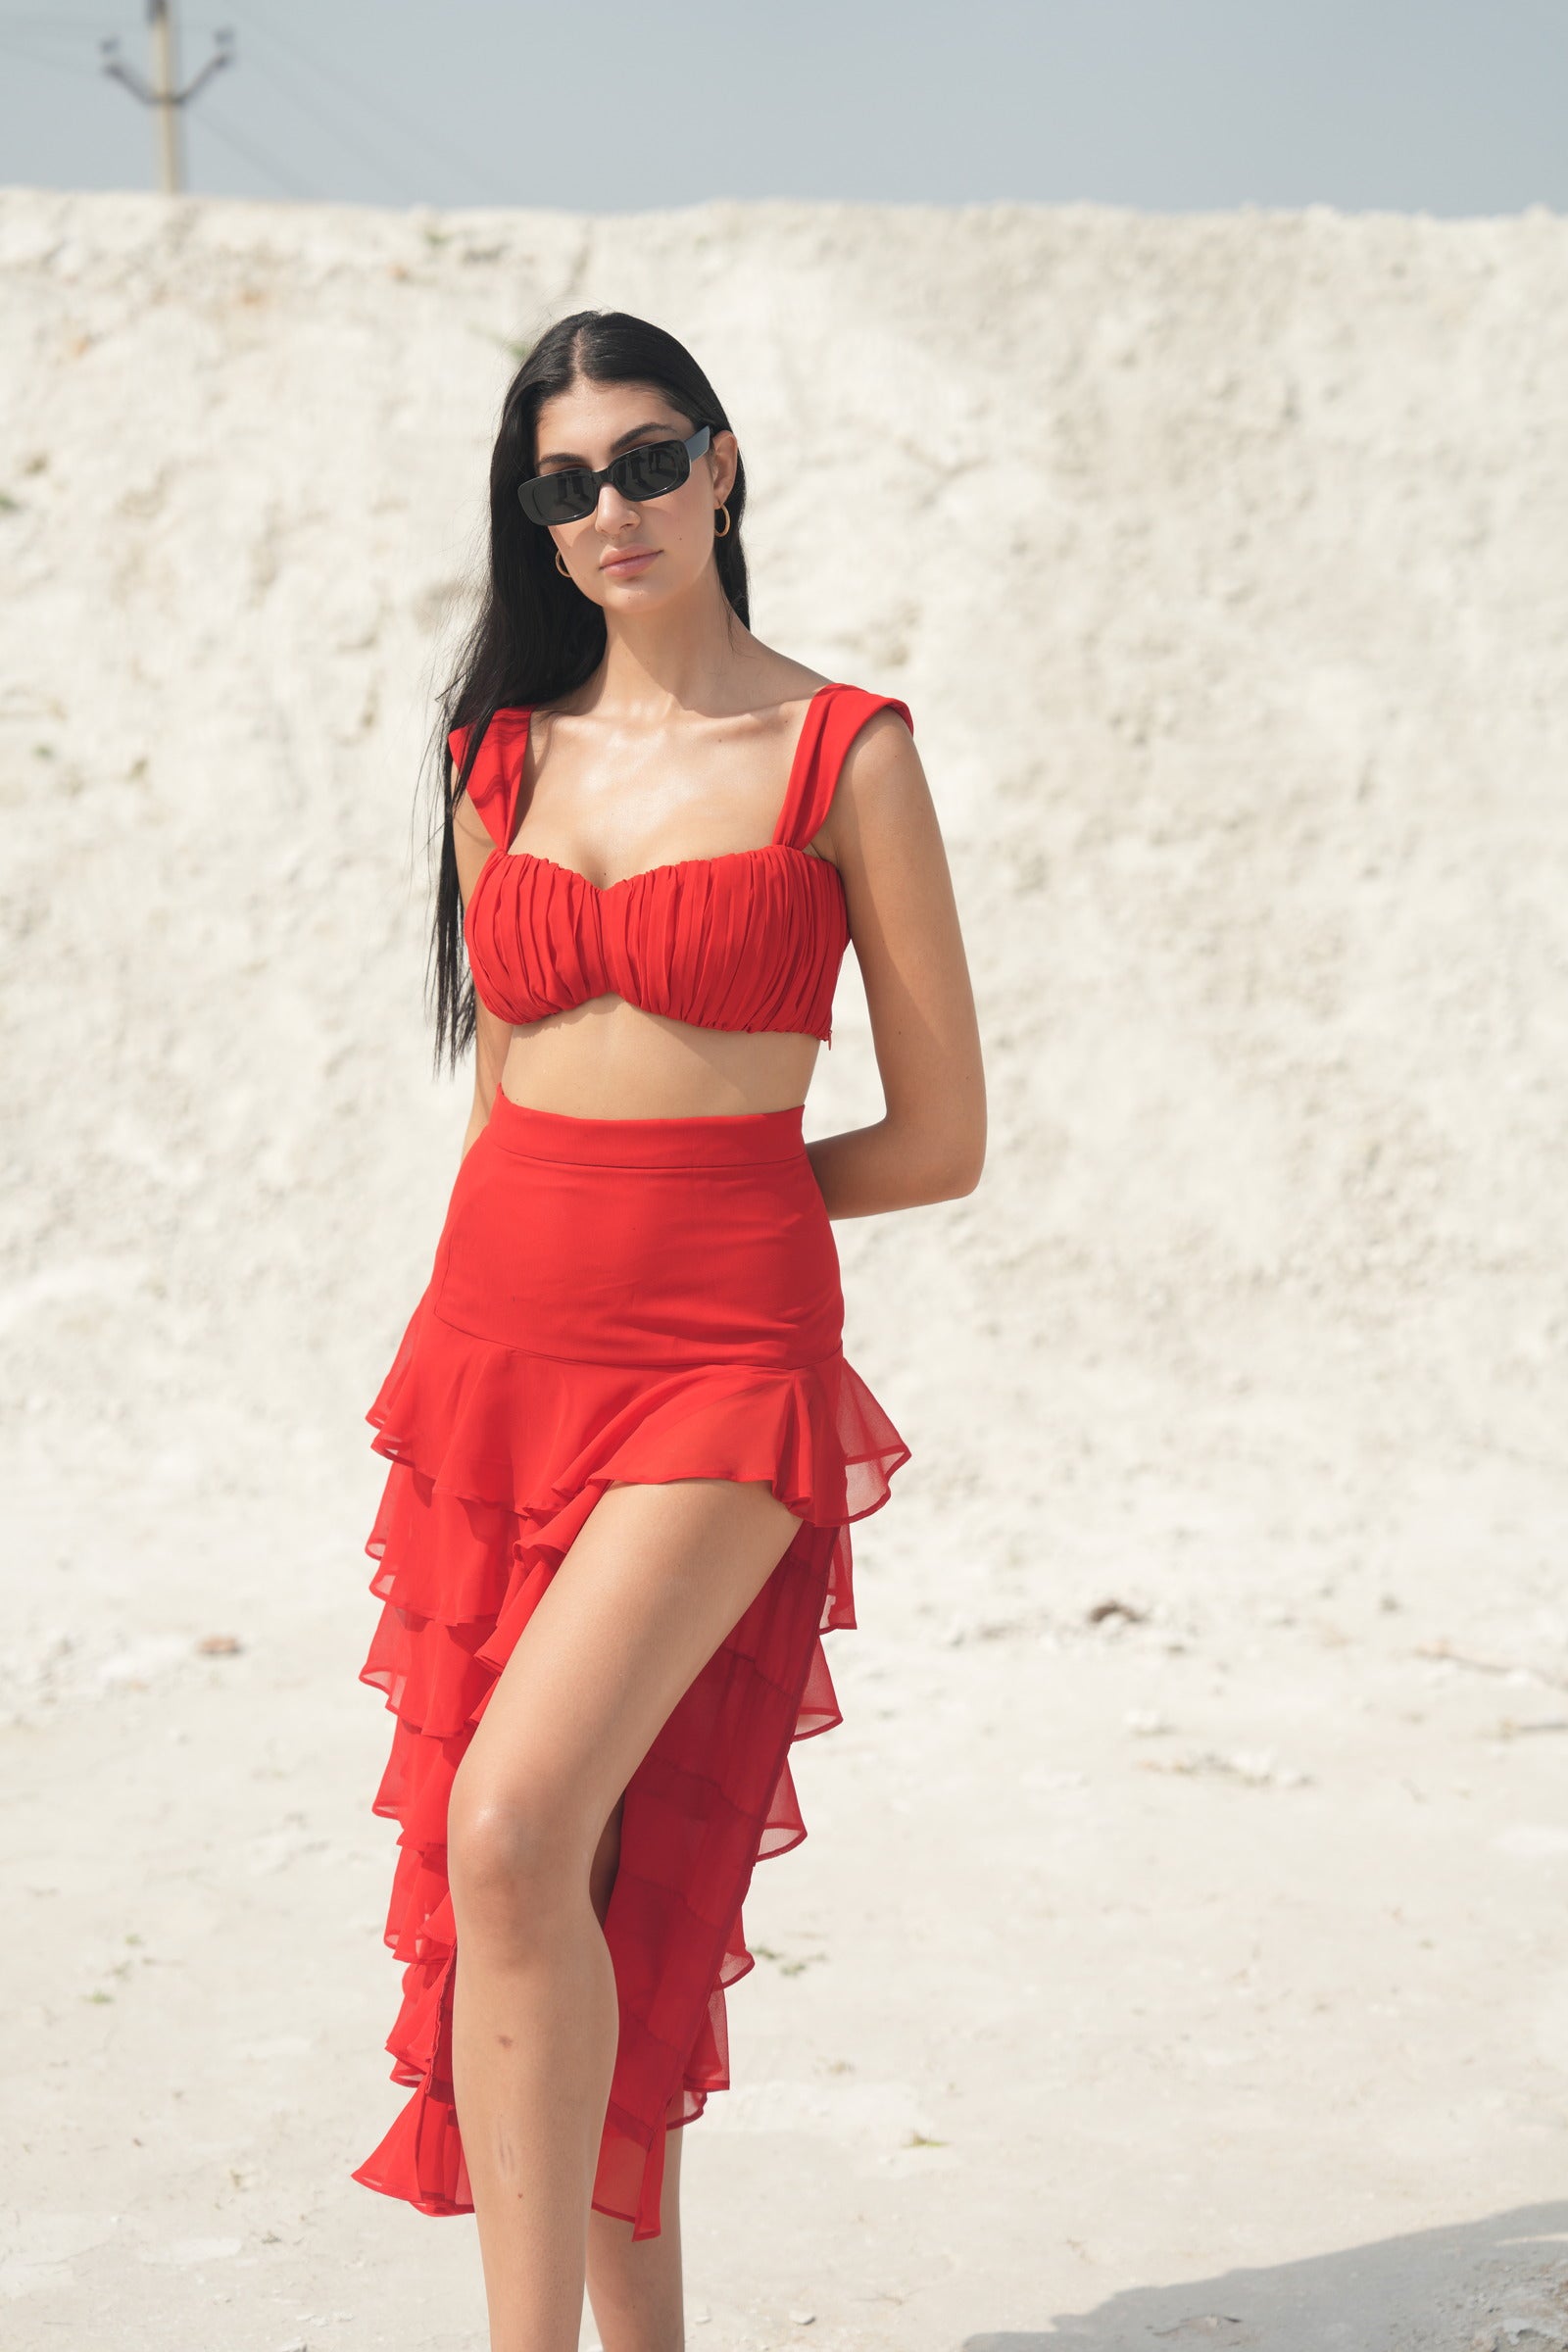 ROSSO CORSA BUSTIER AND RUFFLED SKIRT